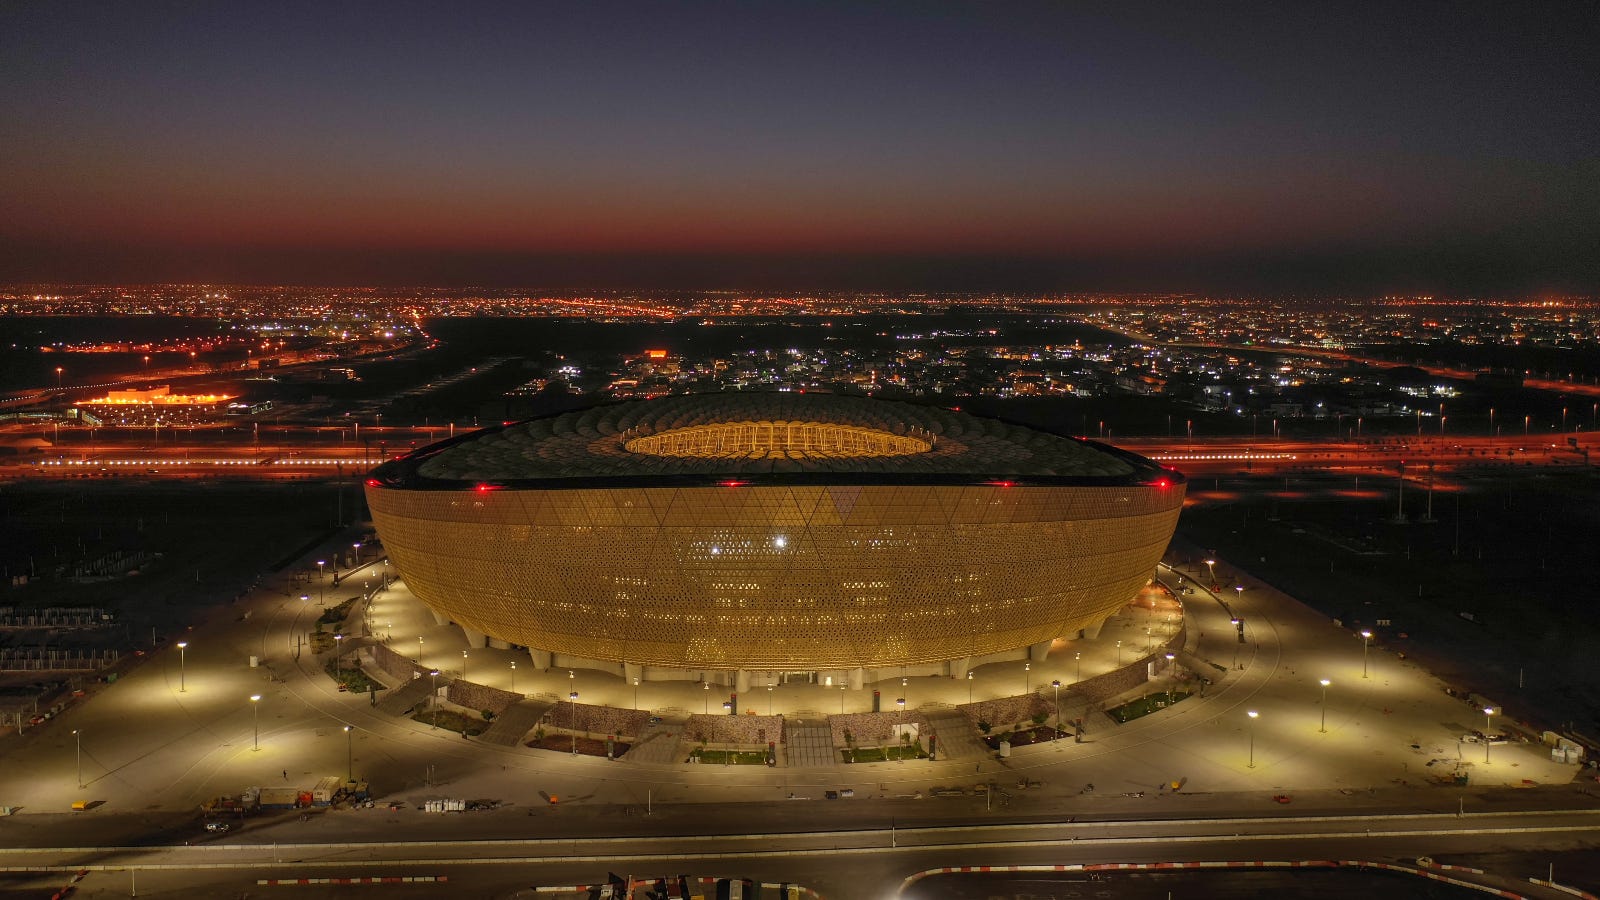 Lusail, Rose Bowl and the iconic Maracana